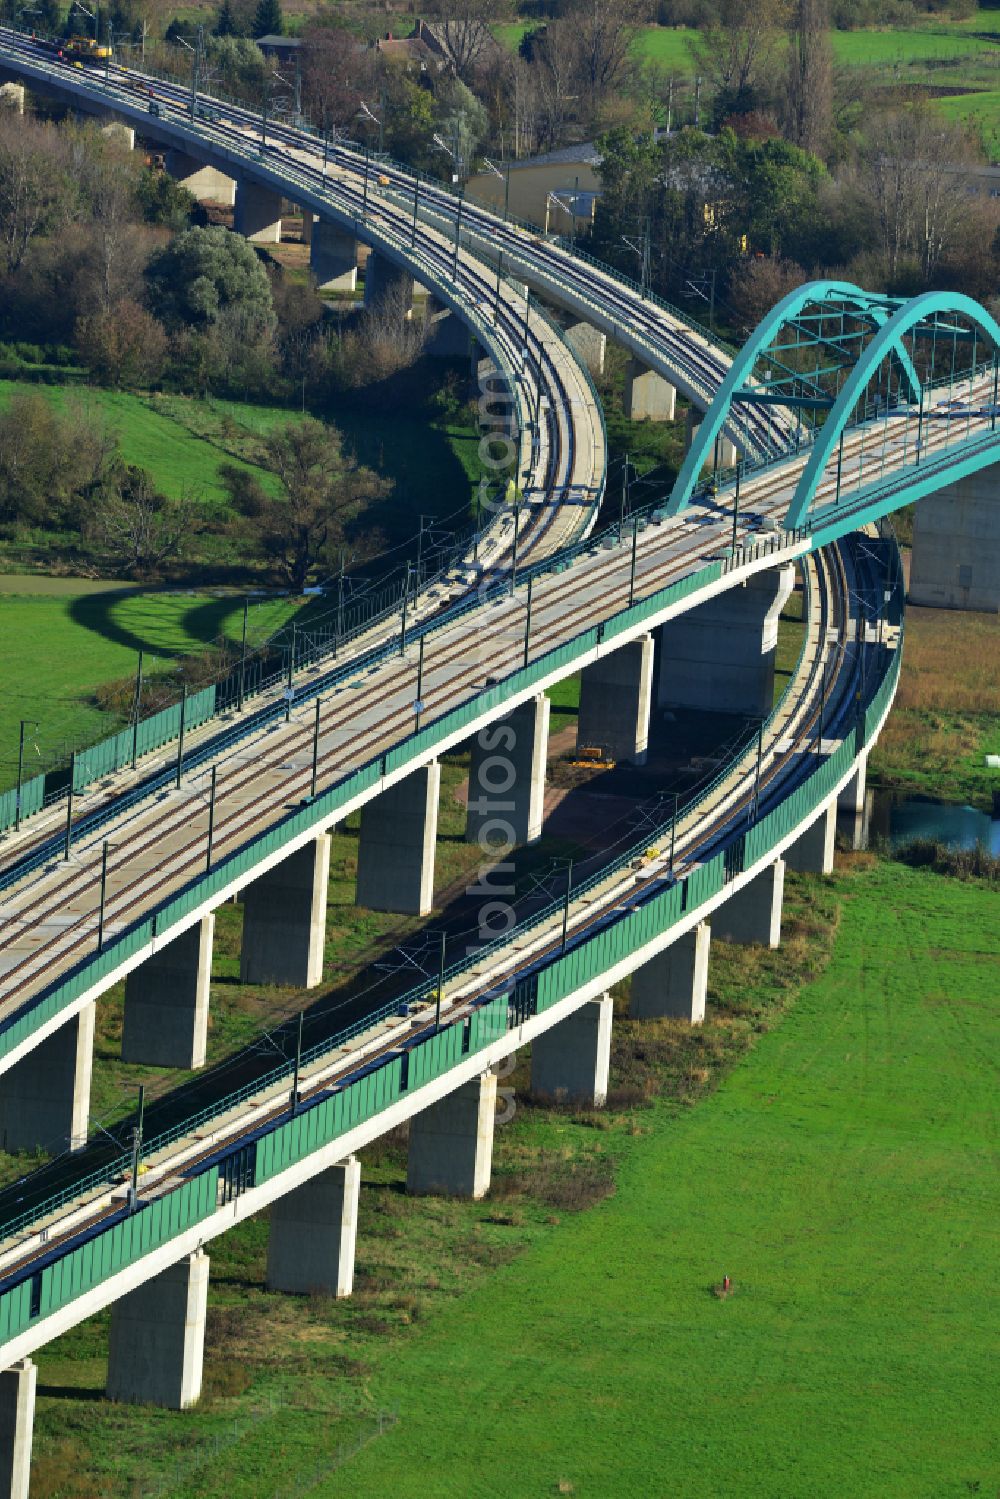 Aerial image Rattmannsdorf - Viaduct of the railway bridge structure to route the railway tracks in Rattmannsdorf in the state Saxony-Anhalt, Germany